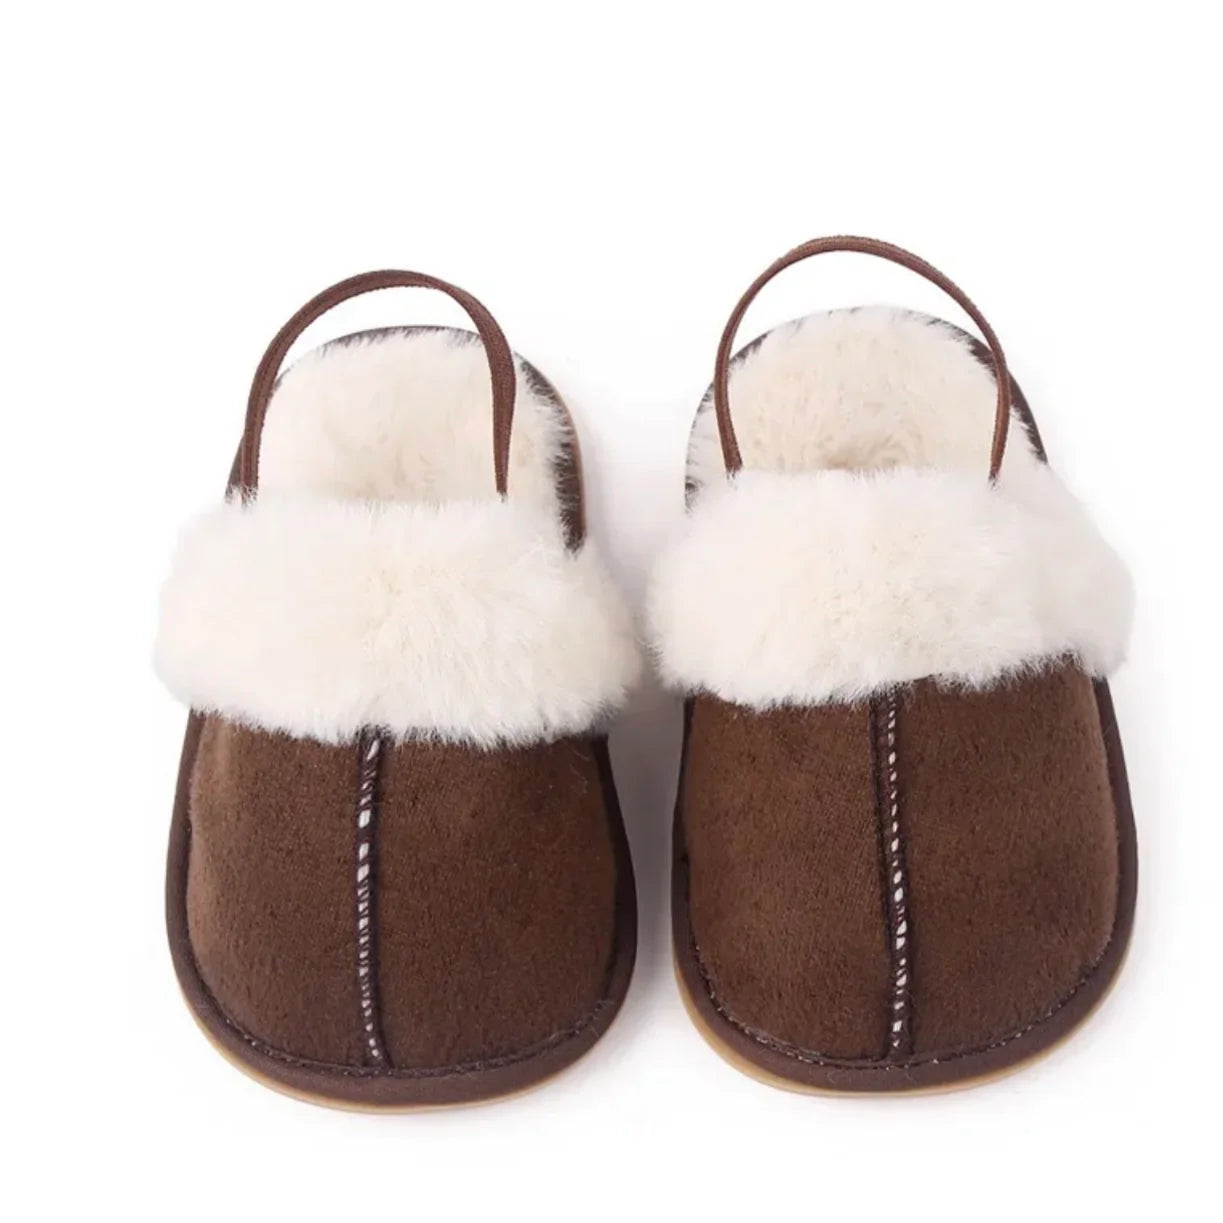 The UGG Fur Slippers